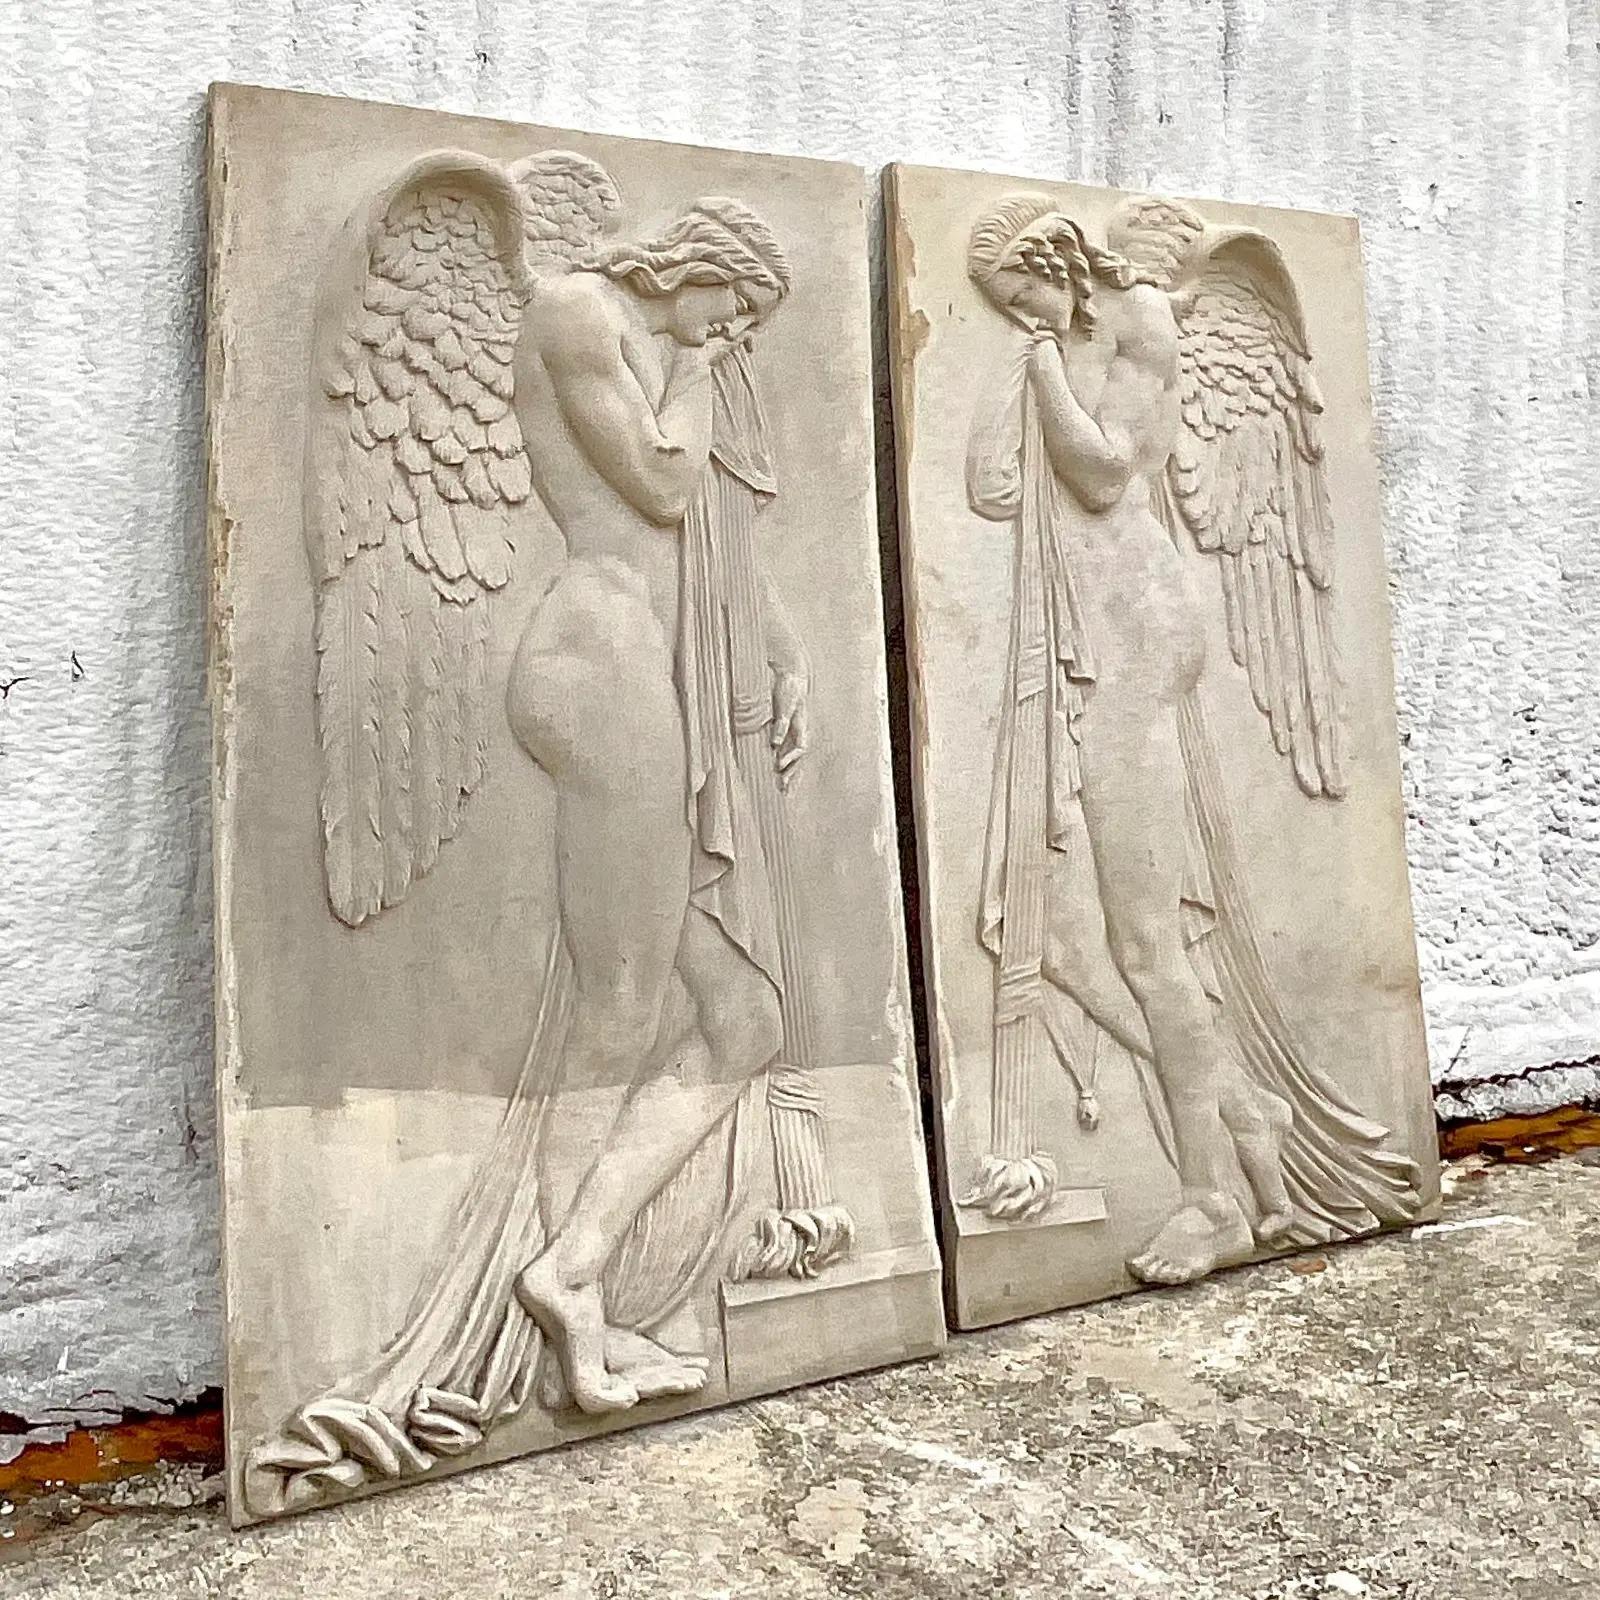 An incredible pair of vintage monumental relief sculptures. Done in the Grand Tour Style with two striking figures in profile. Perfect indoors or poolside. You decide. Acquired from a Palm Beach estate.